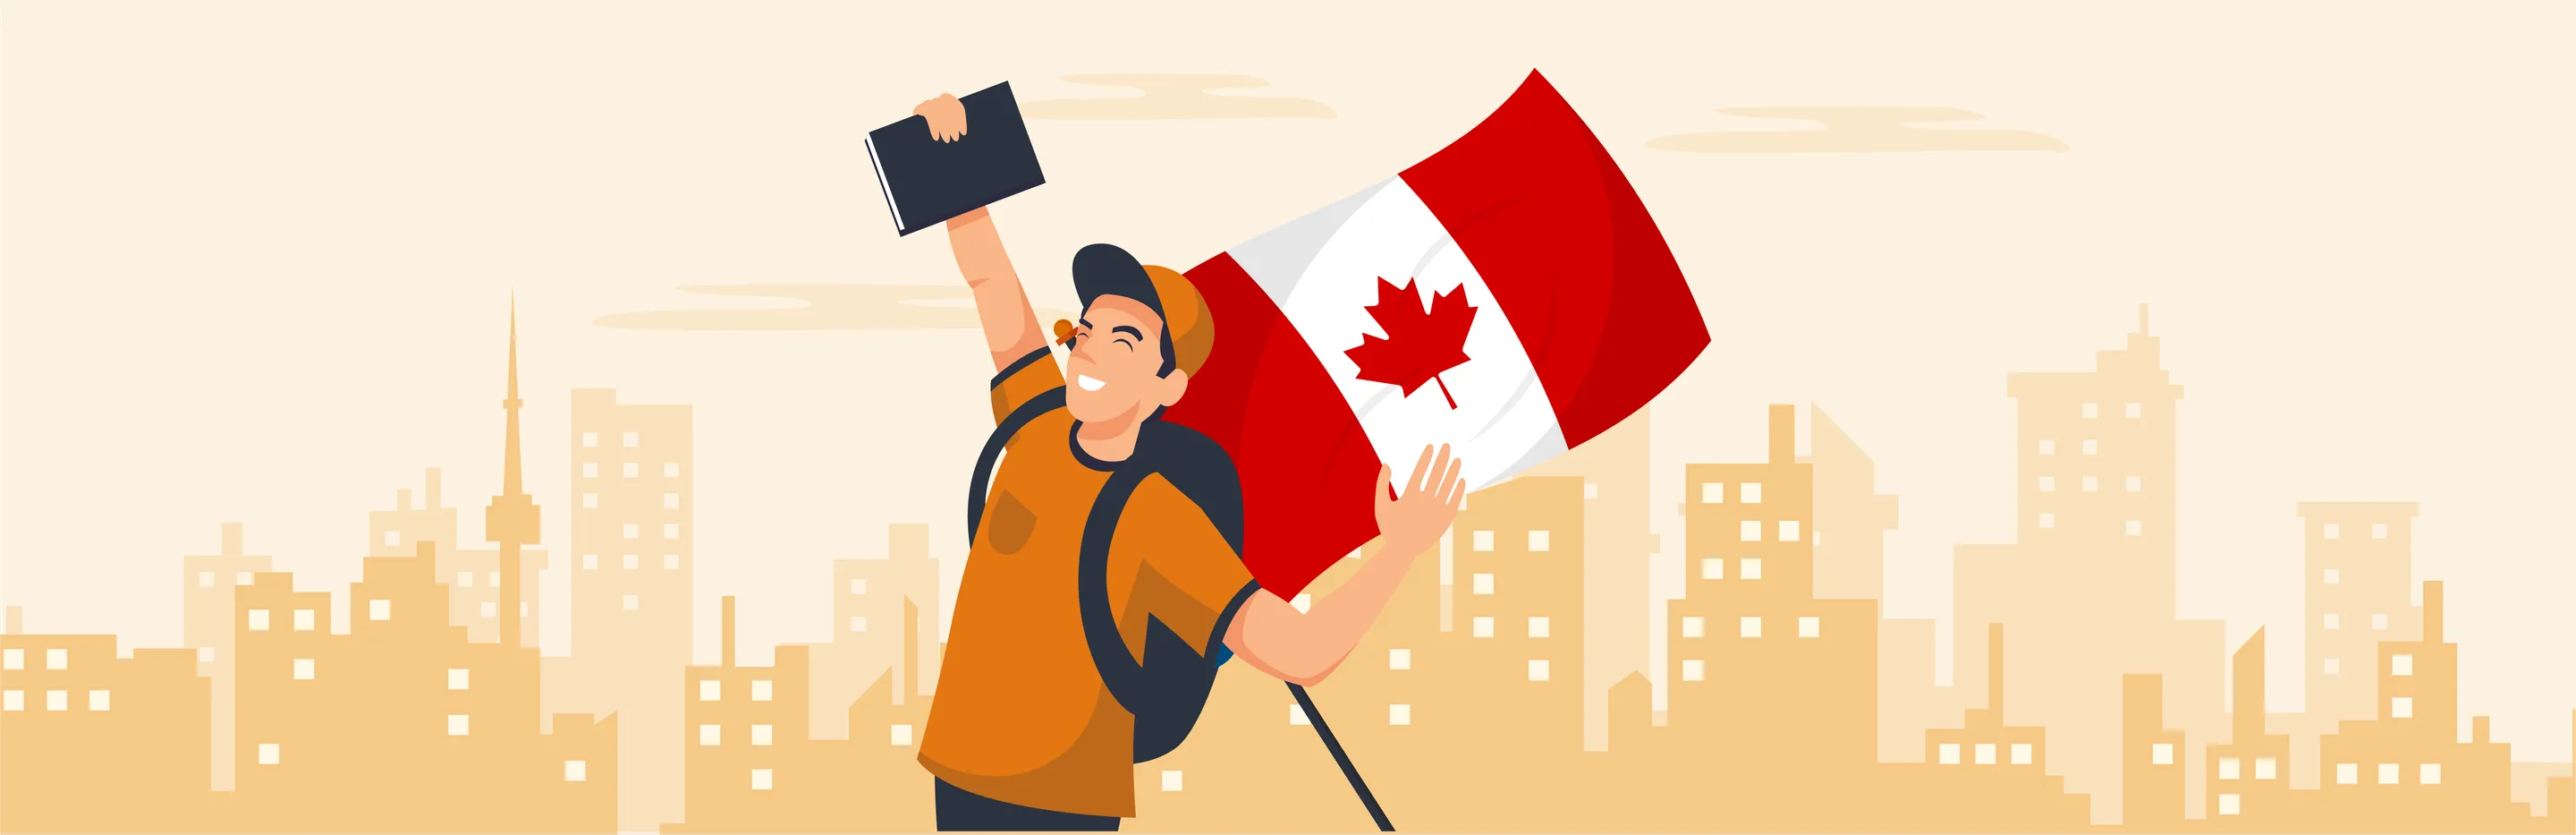 MS in Canada: Universities, Cost, Eligibility Image